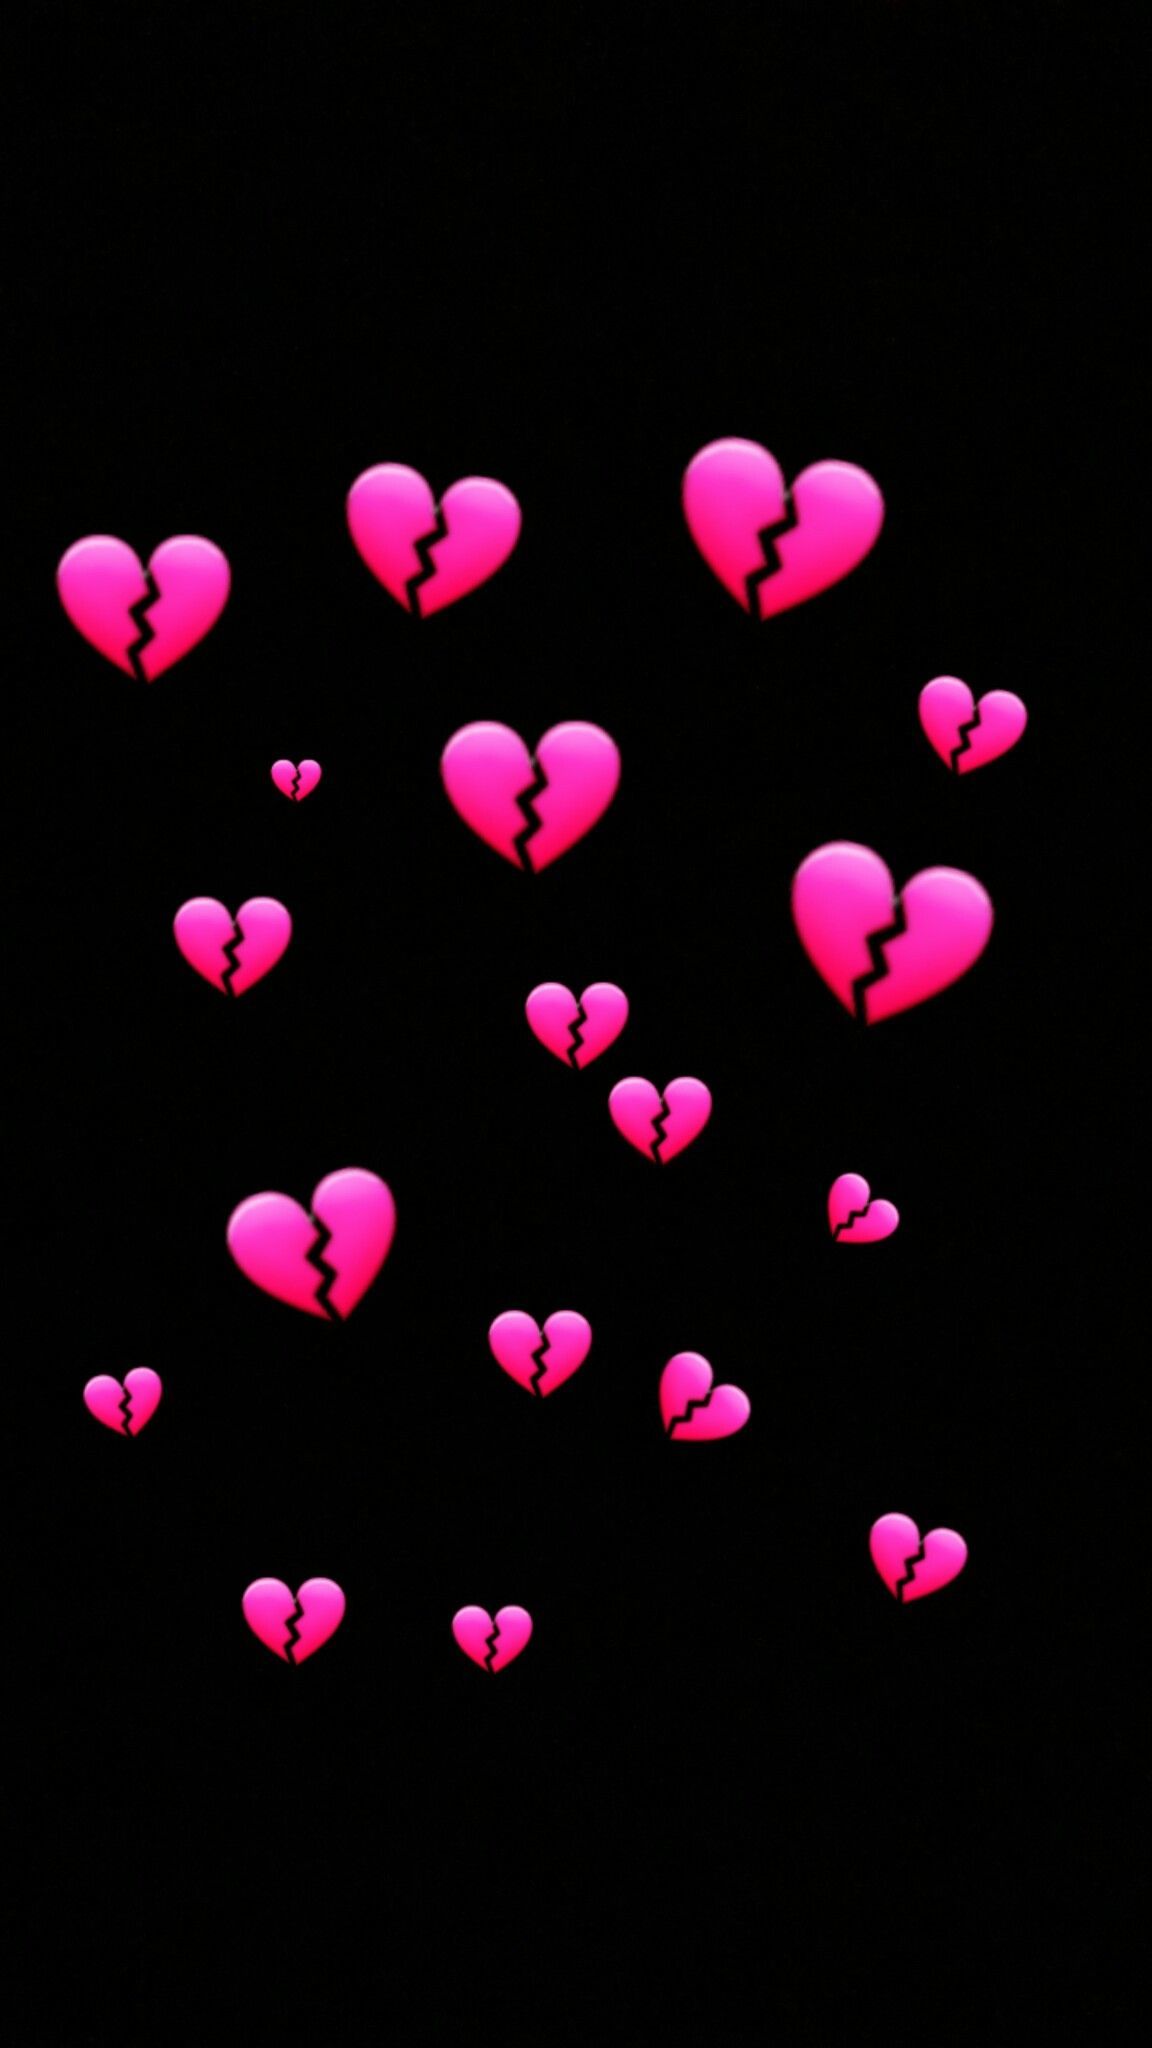 A group of pink hearts in the shape - Emoji